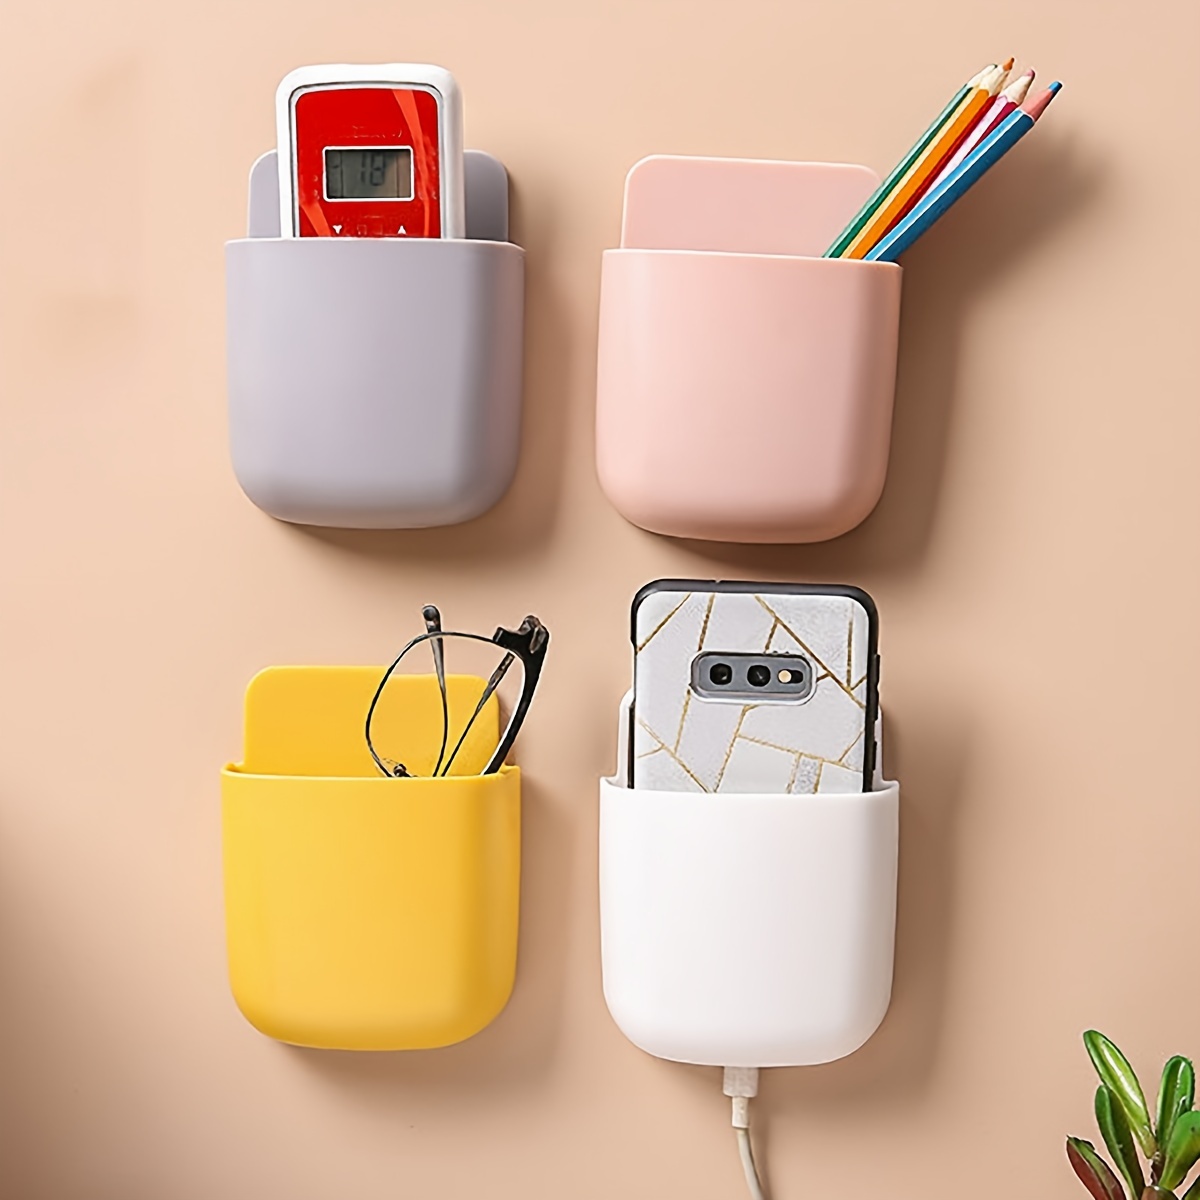 6 Pieces Self-adhesive Storage Box Remote Control Holder Desk Sticky Pen  Holder Wall Mounted Adhesive Organizer for Remote Control, Pencil, Phone